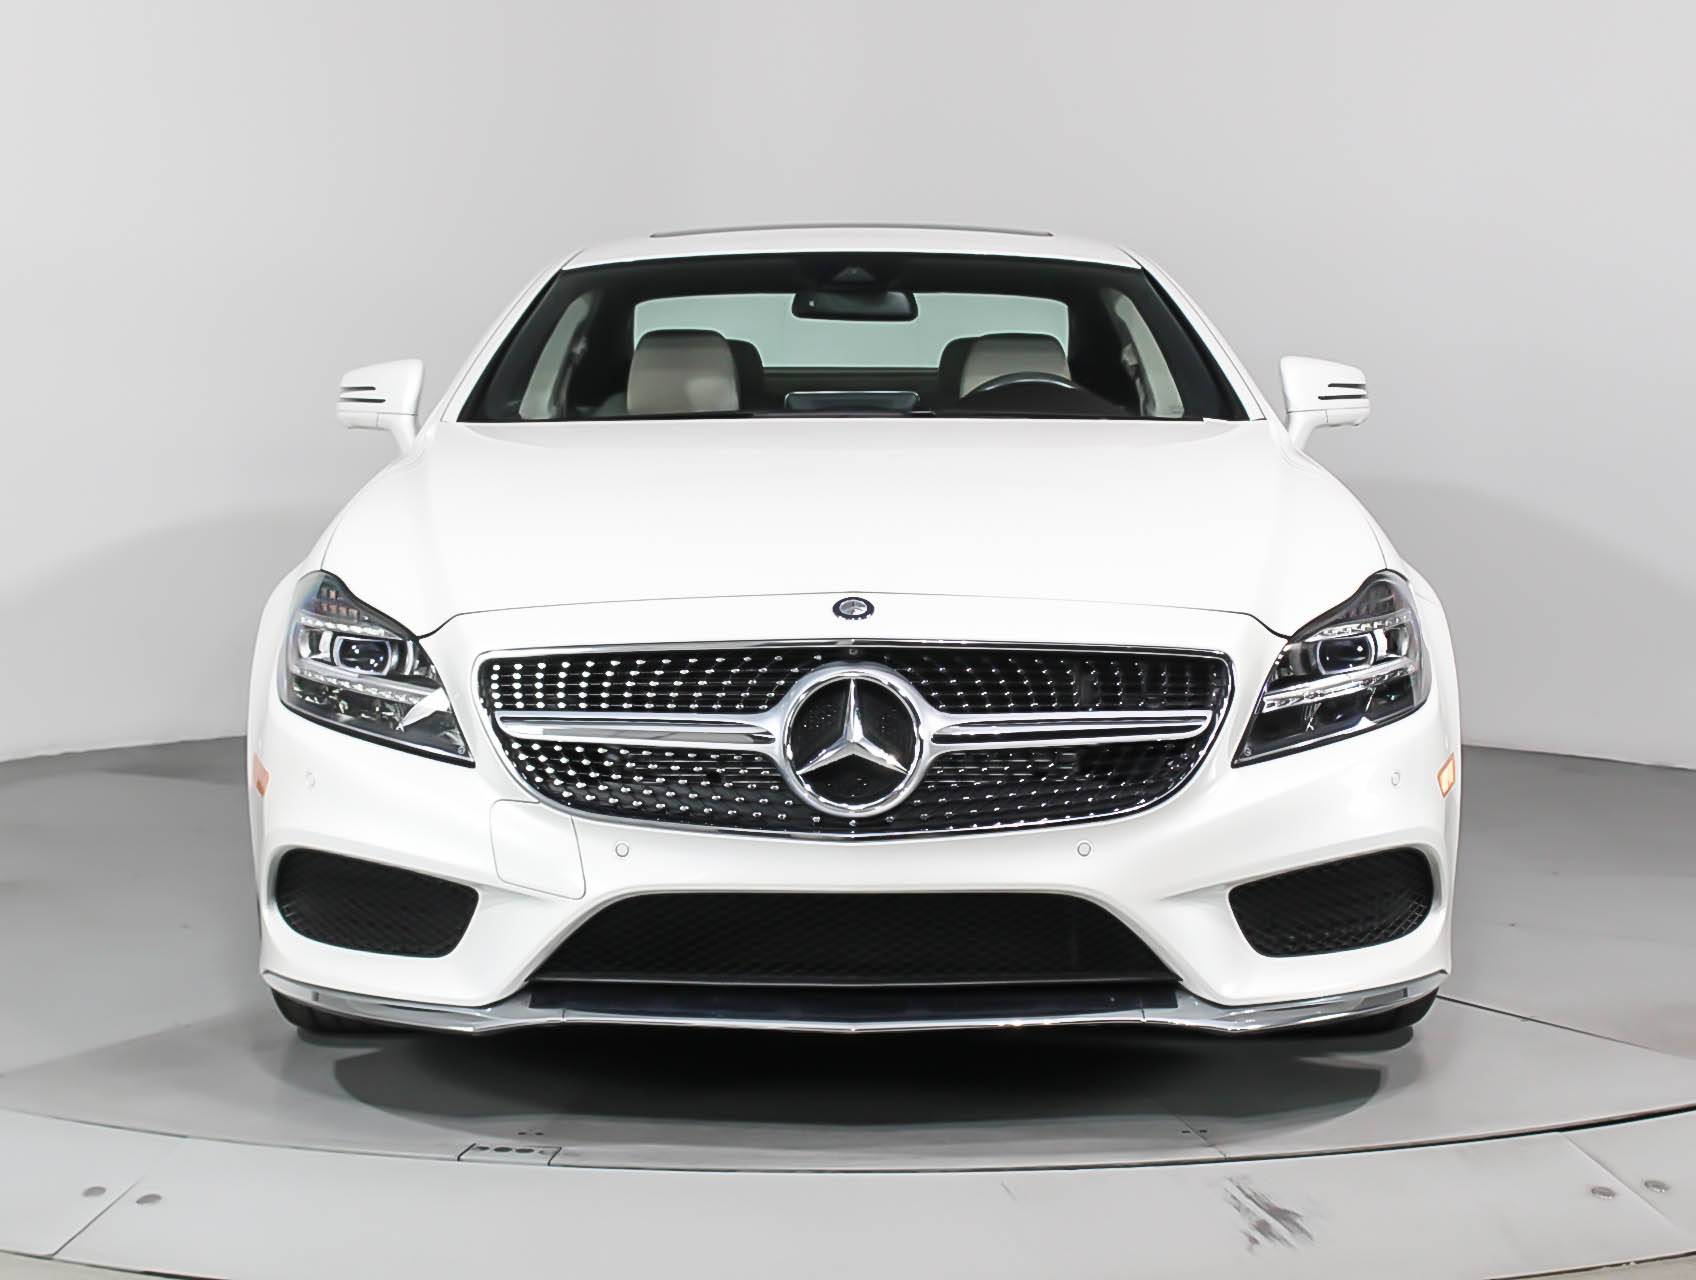 Florida Fine Cars - Used MERCEDES-BENZ CLS CLASS 2015 WEST PALM CLS400